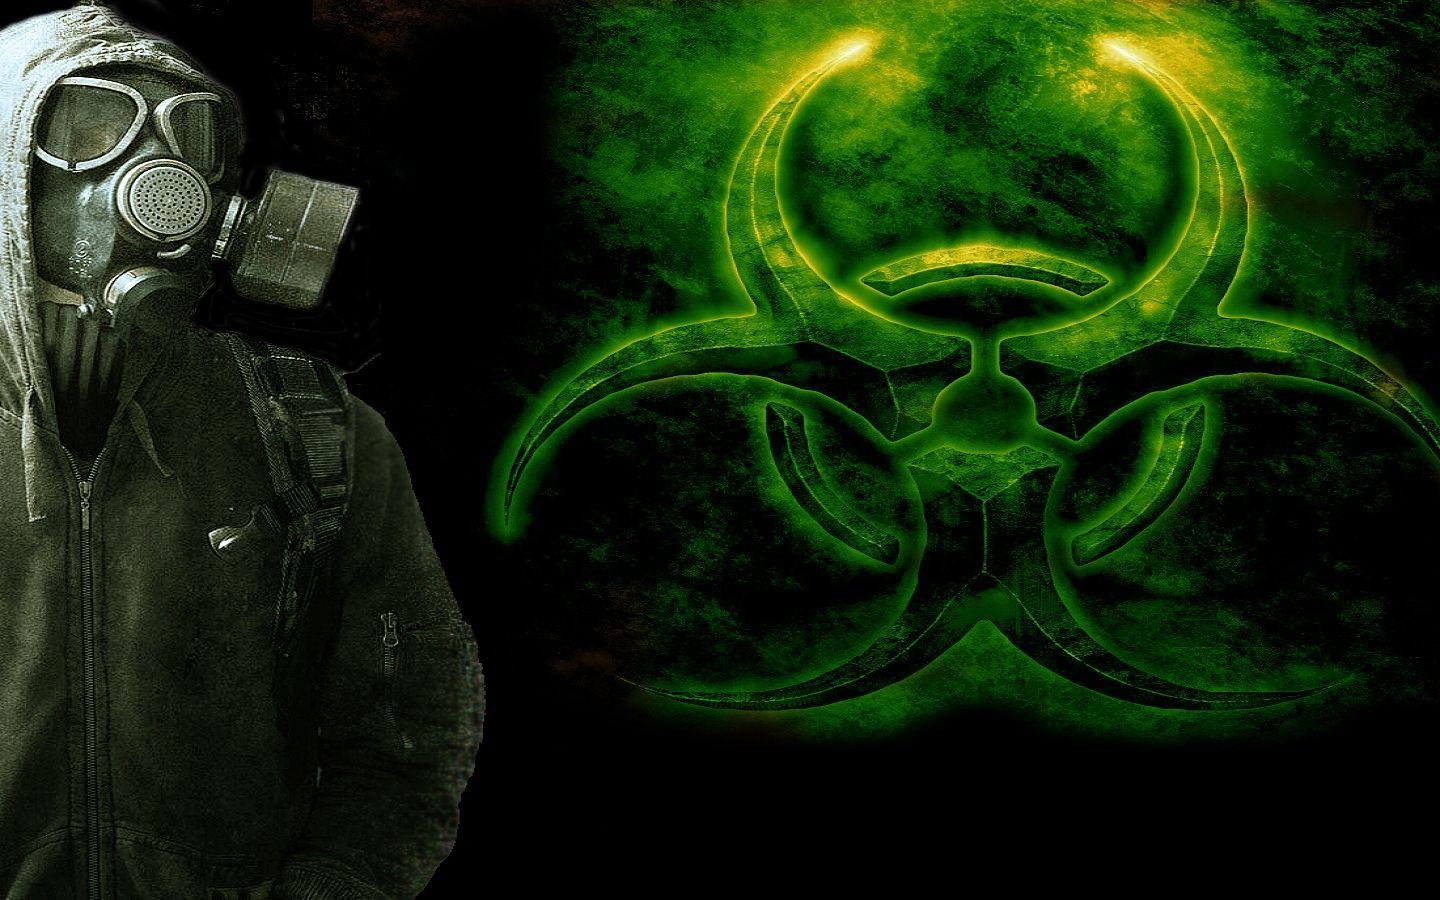 Download 1440x900 Sci Fi Gas Mask Wallpaper Background